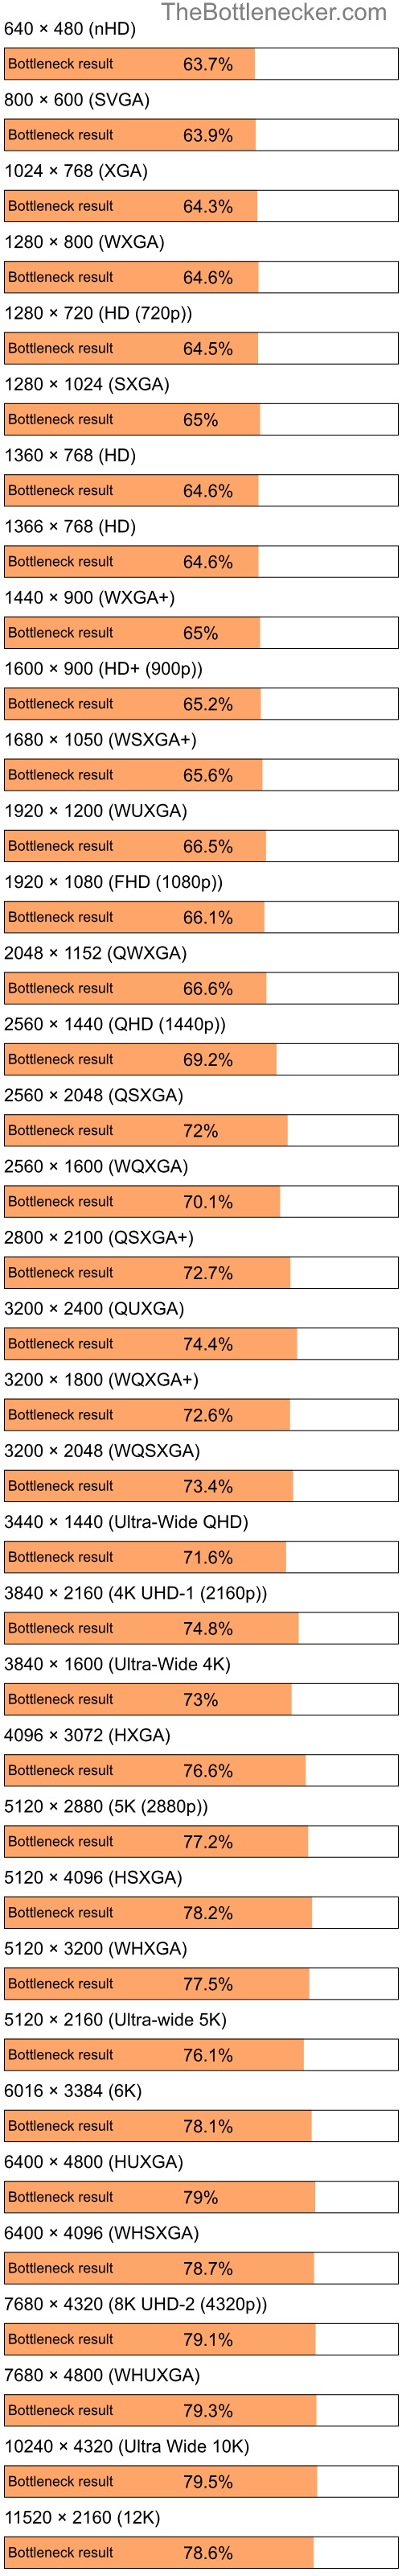 Bottleneck results by resolution for Intel Celeron and NVIDIA GeForce 6600 in7 Days to Die